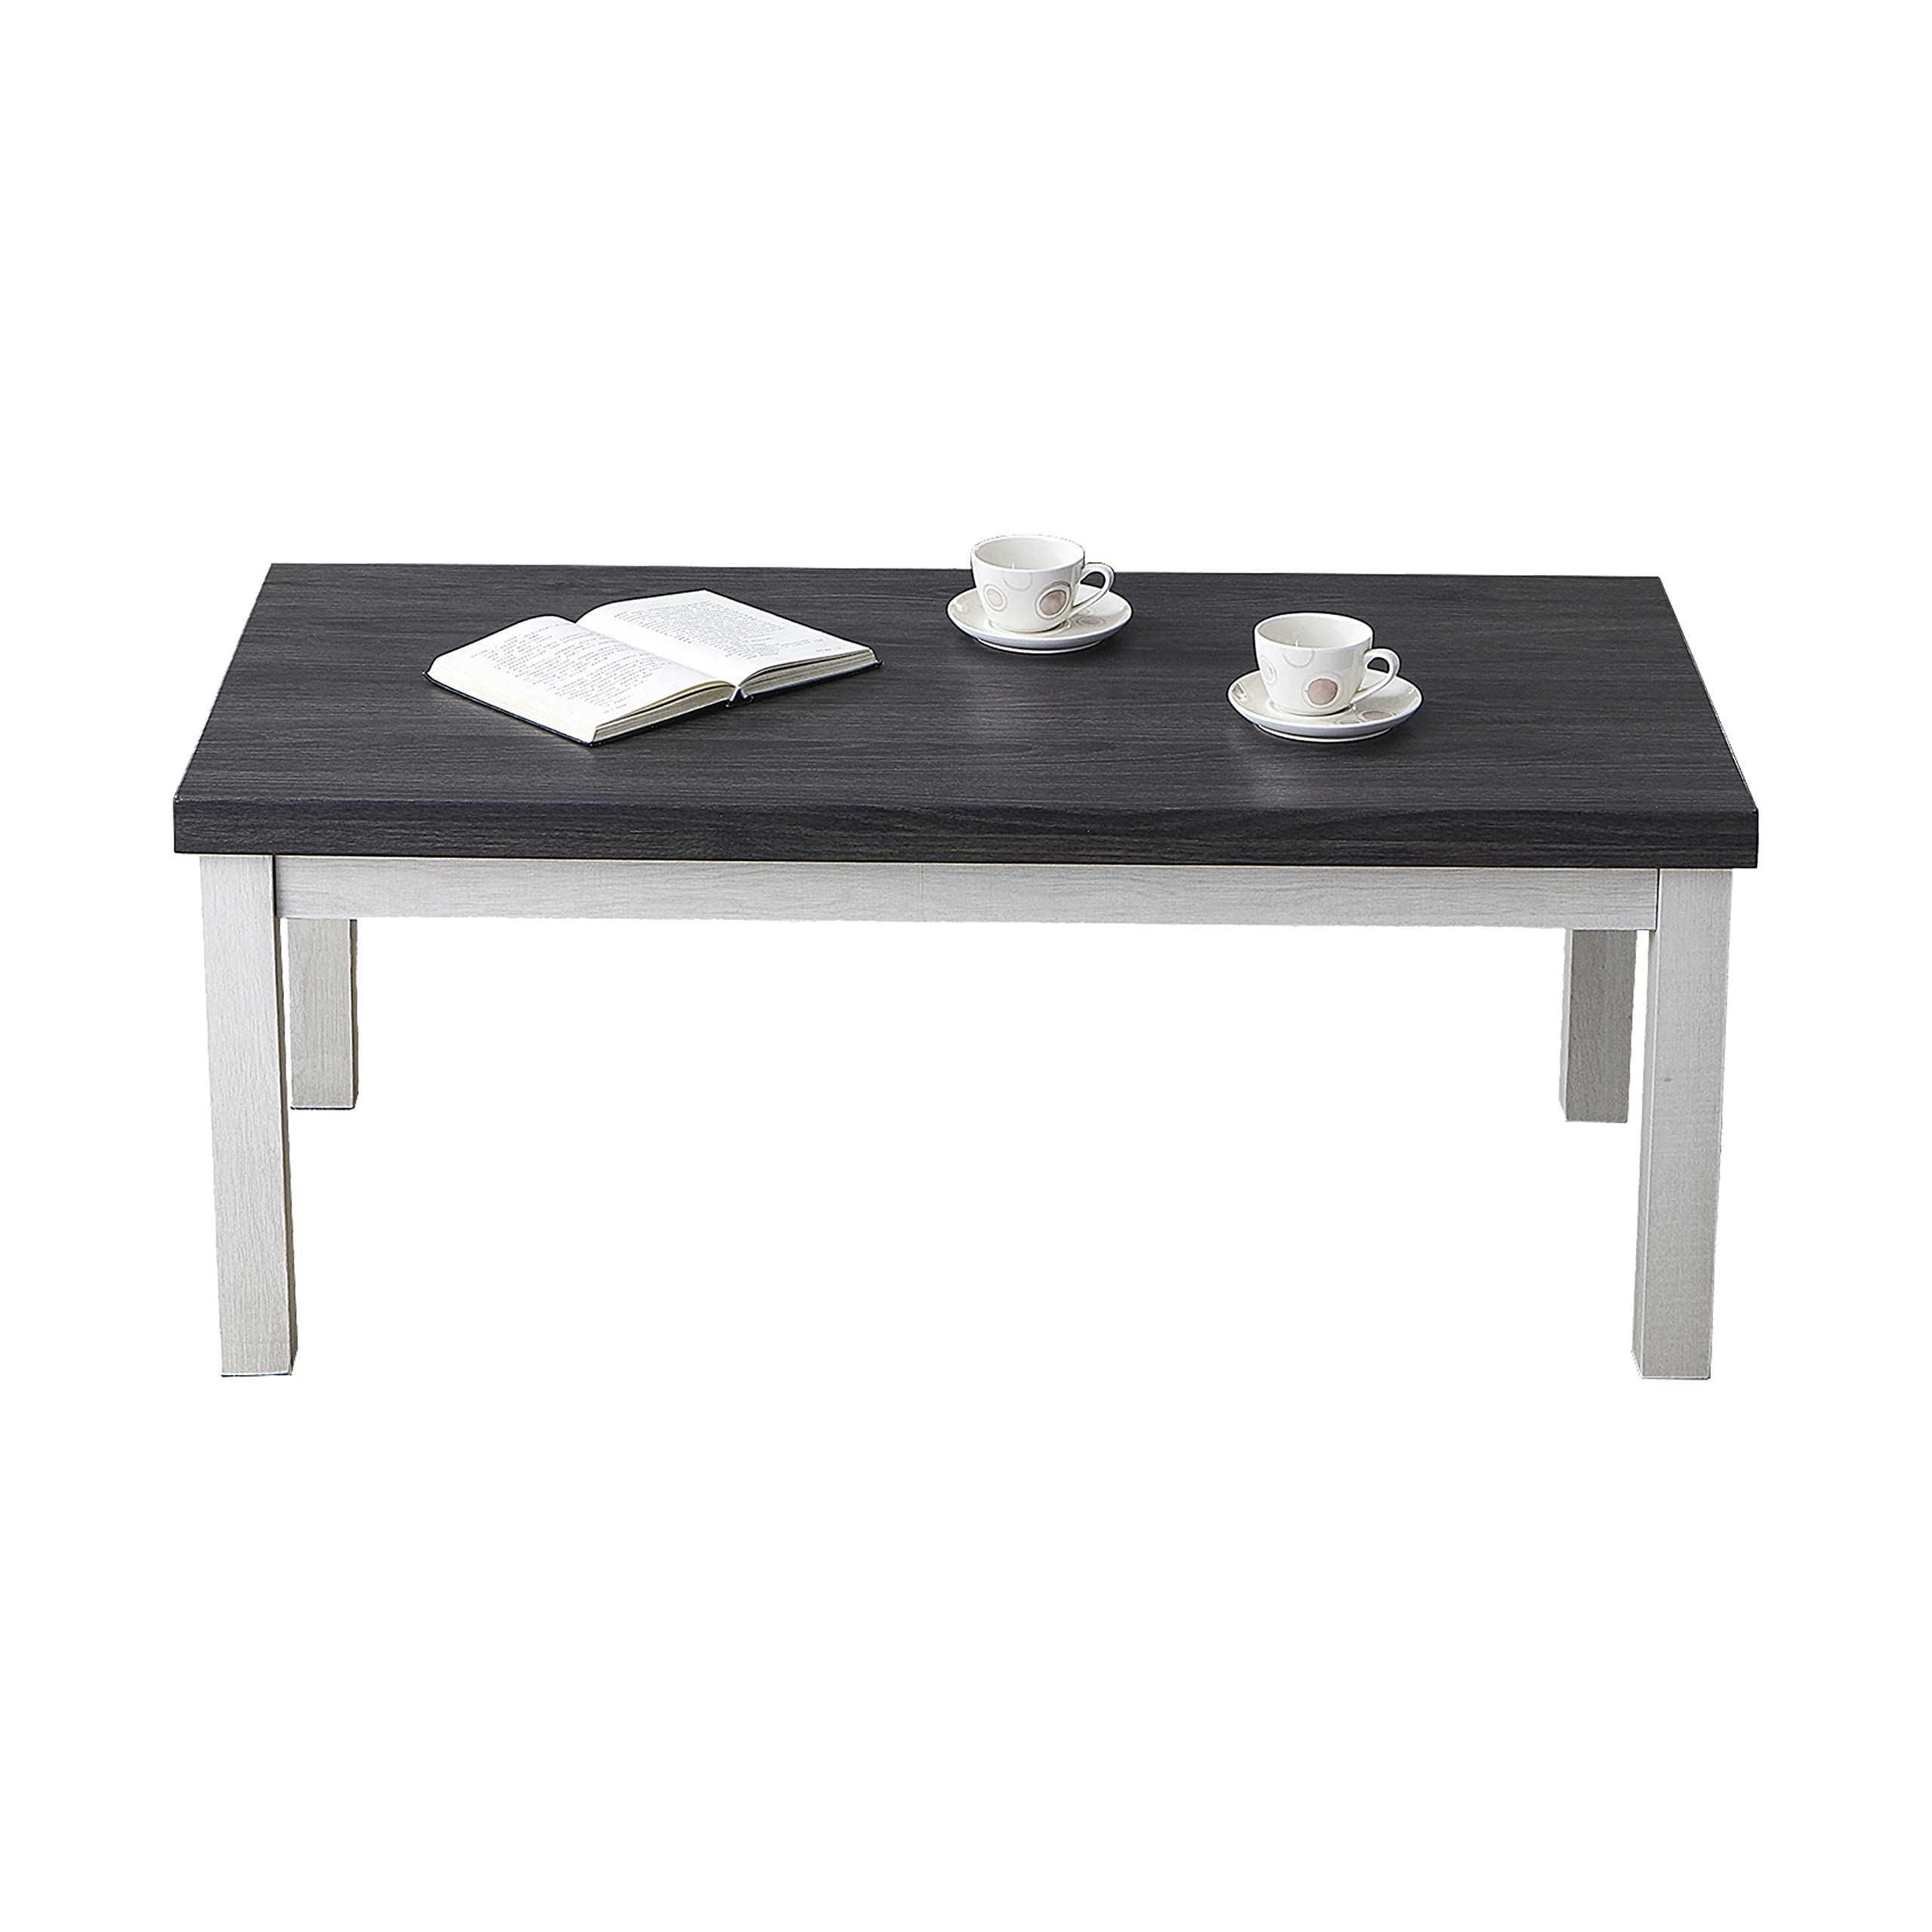 2019 Pemberly Row Replicated Wood Coffee Tables Pertaining To Amazon: Roundhill Furniture Ronan Two Tone Wood Rectangle Coffee Table,  Gray : Home & Kitchen (View 7 of 10)